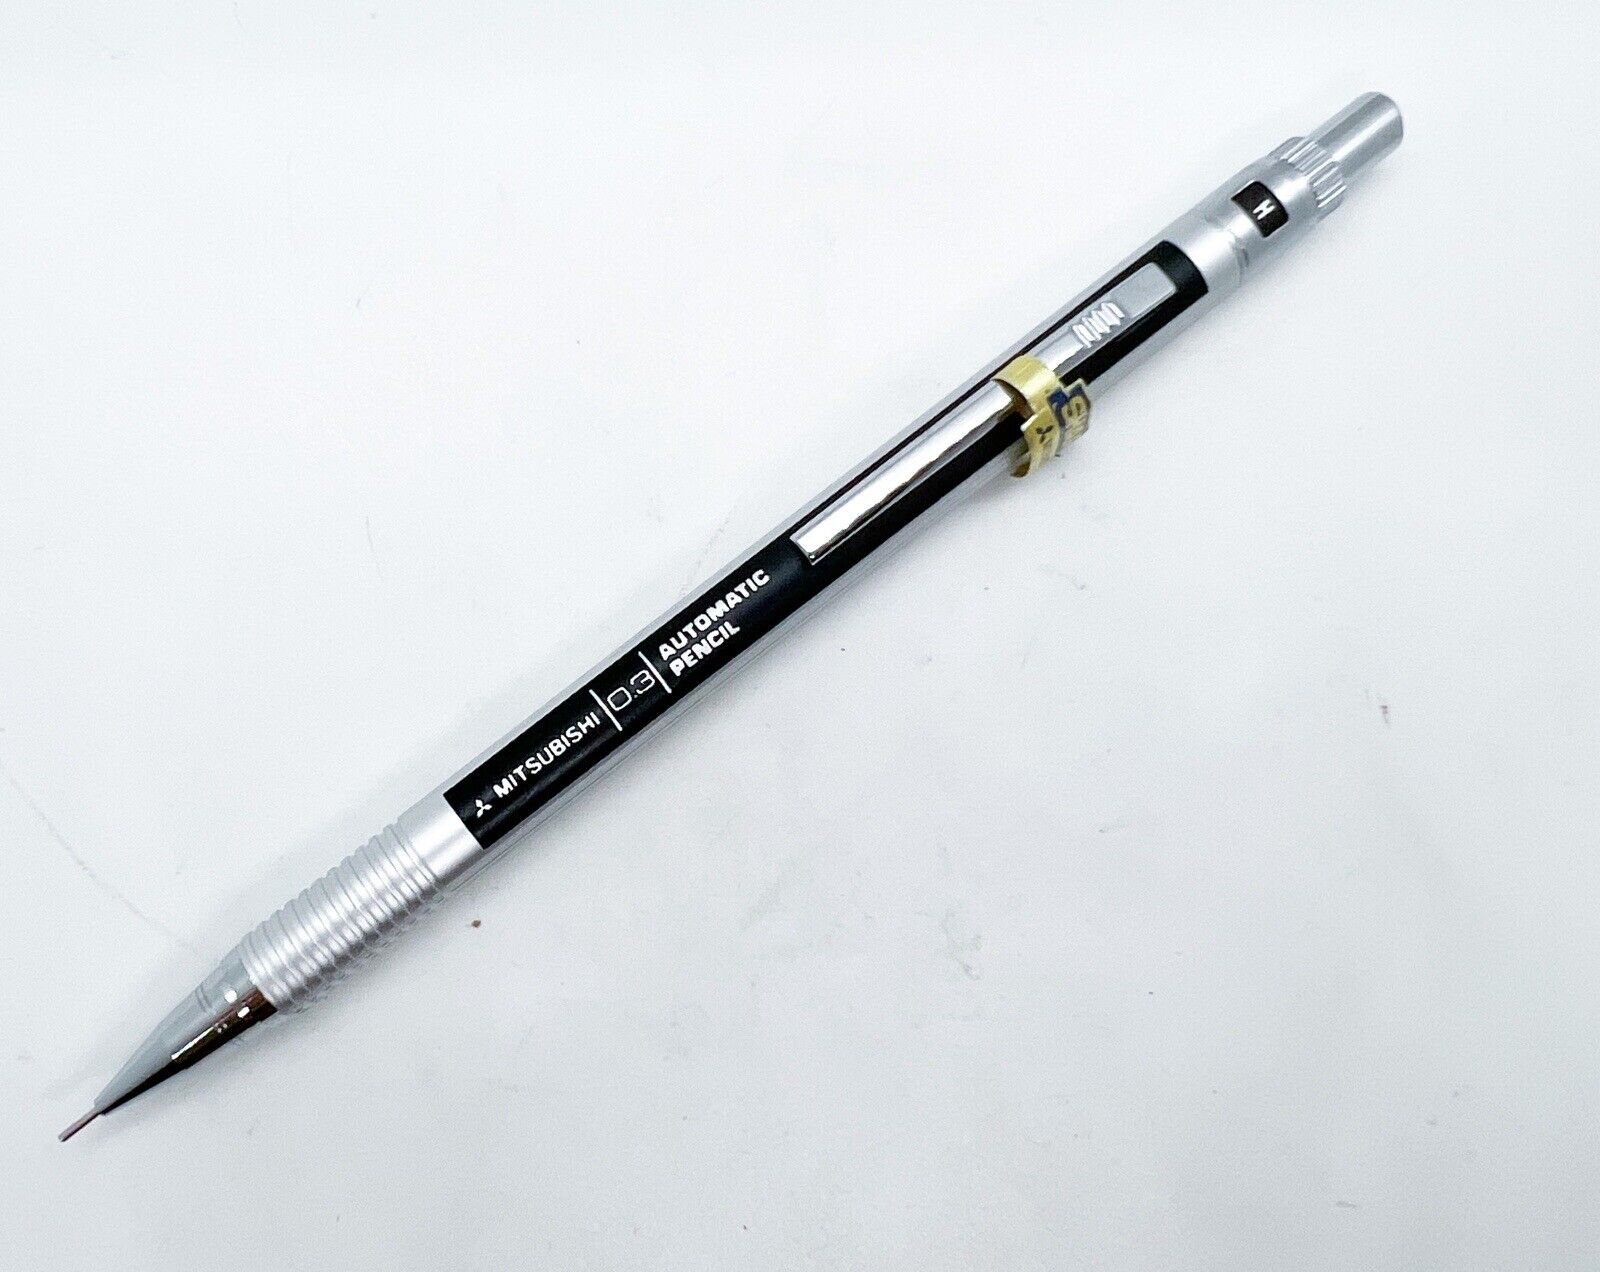 NOS Mitsubishi Automatic 0.3mm Mechanical Pencil Early Version 